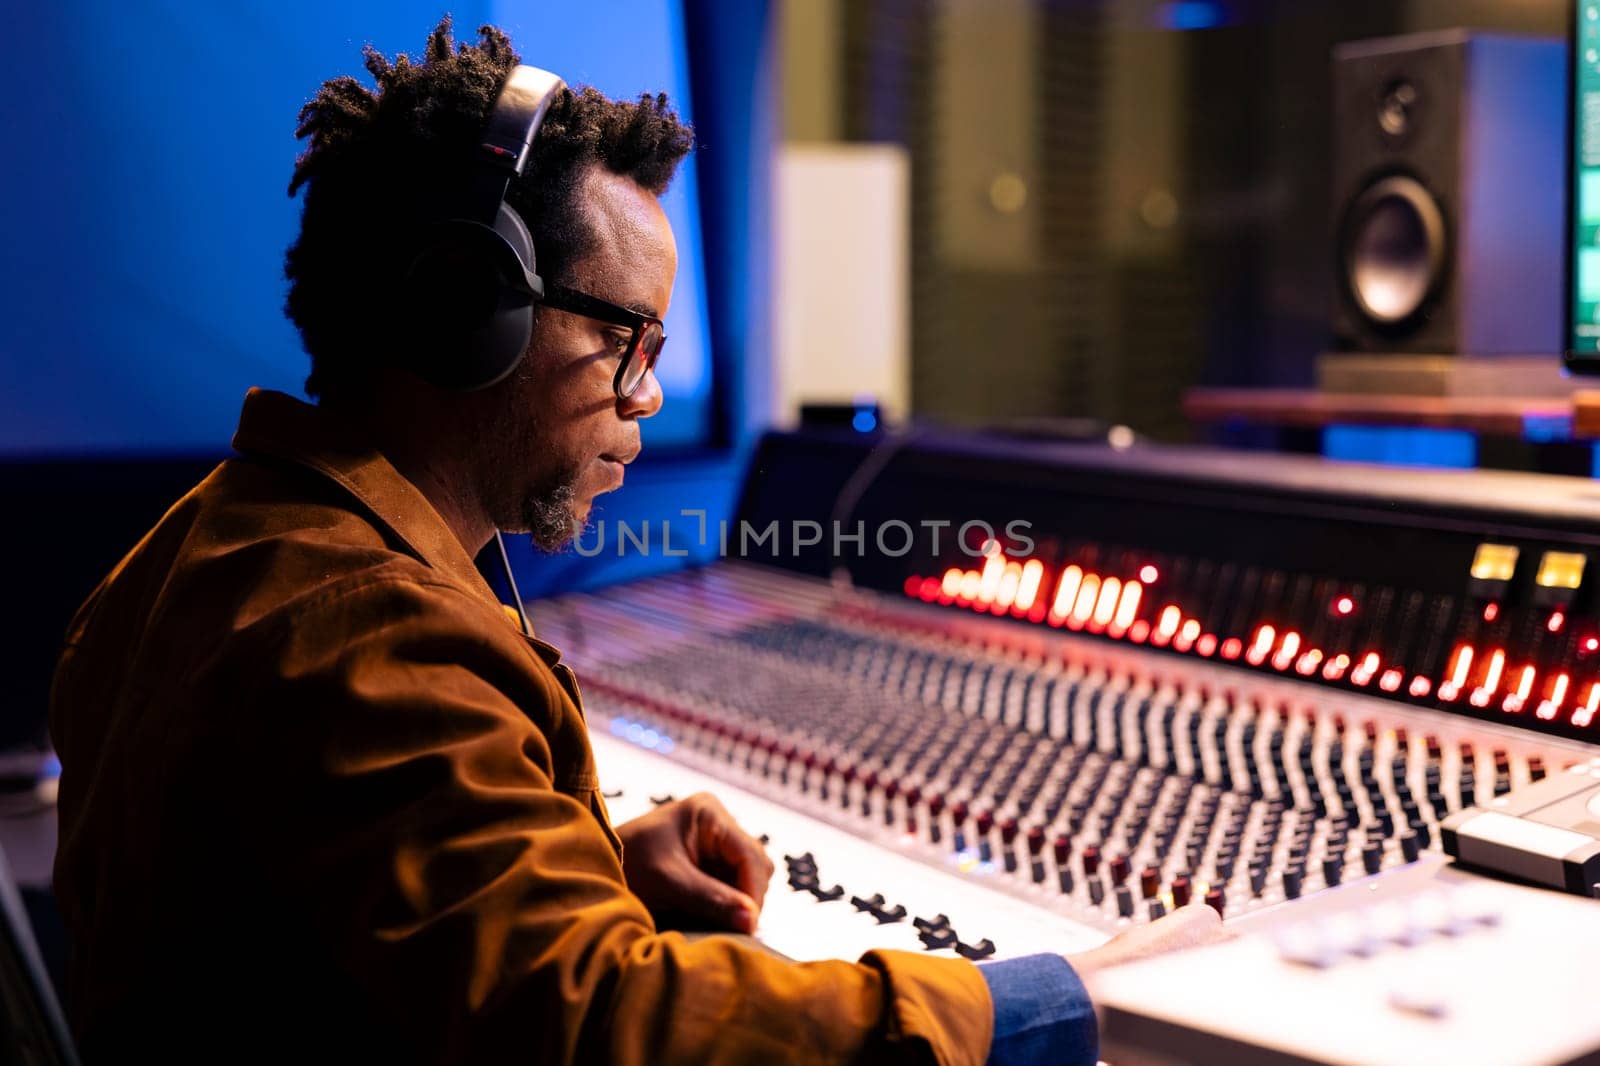 African american audio expert editing tracks in professional recording studio, mixing and mastering music in control room with technical gear. Sound engineer producing new tracks for an album.